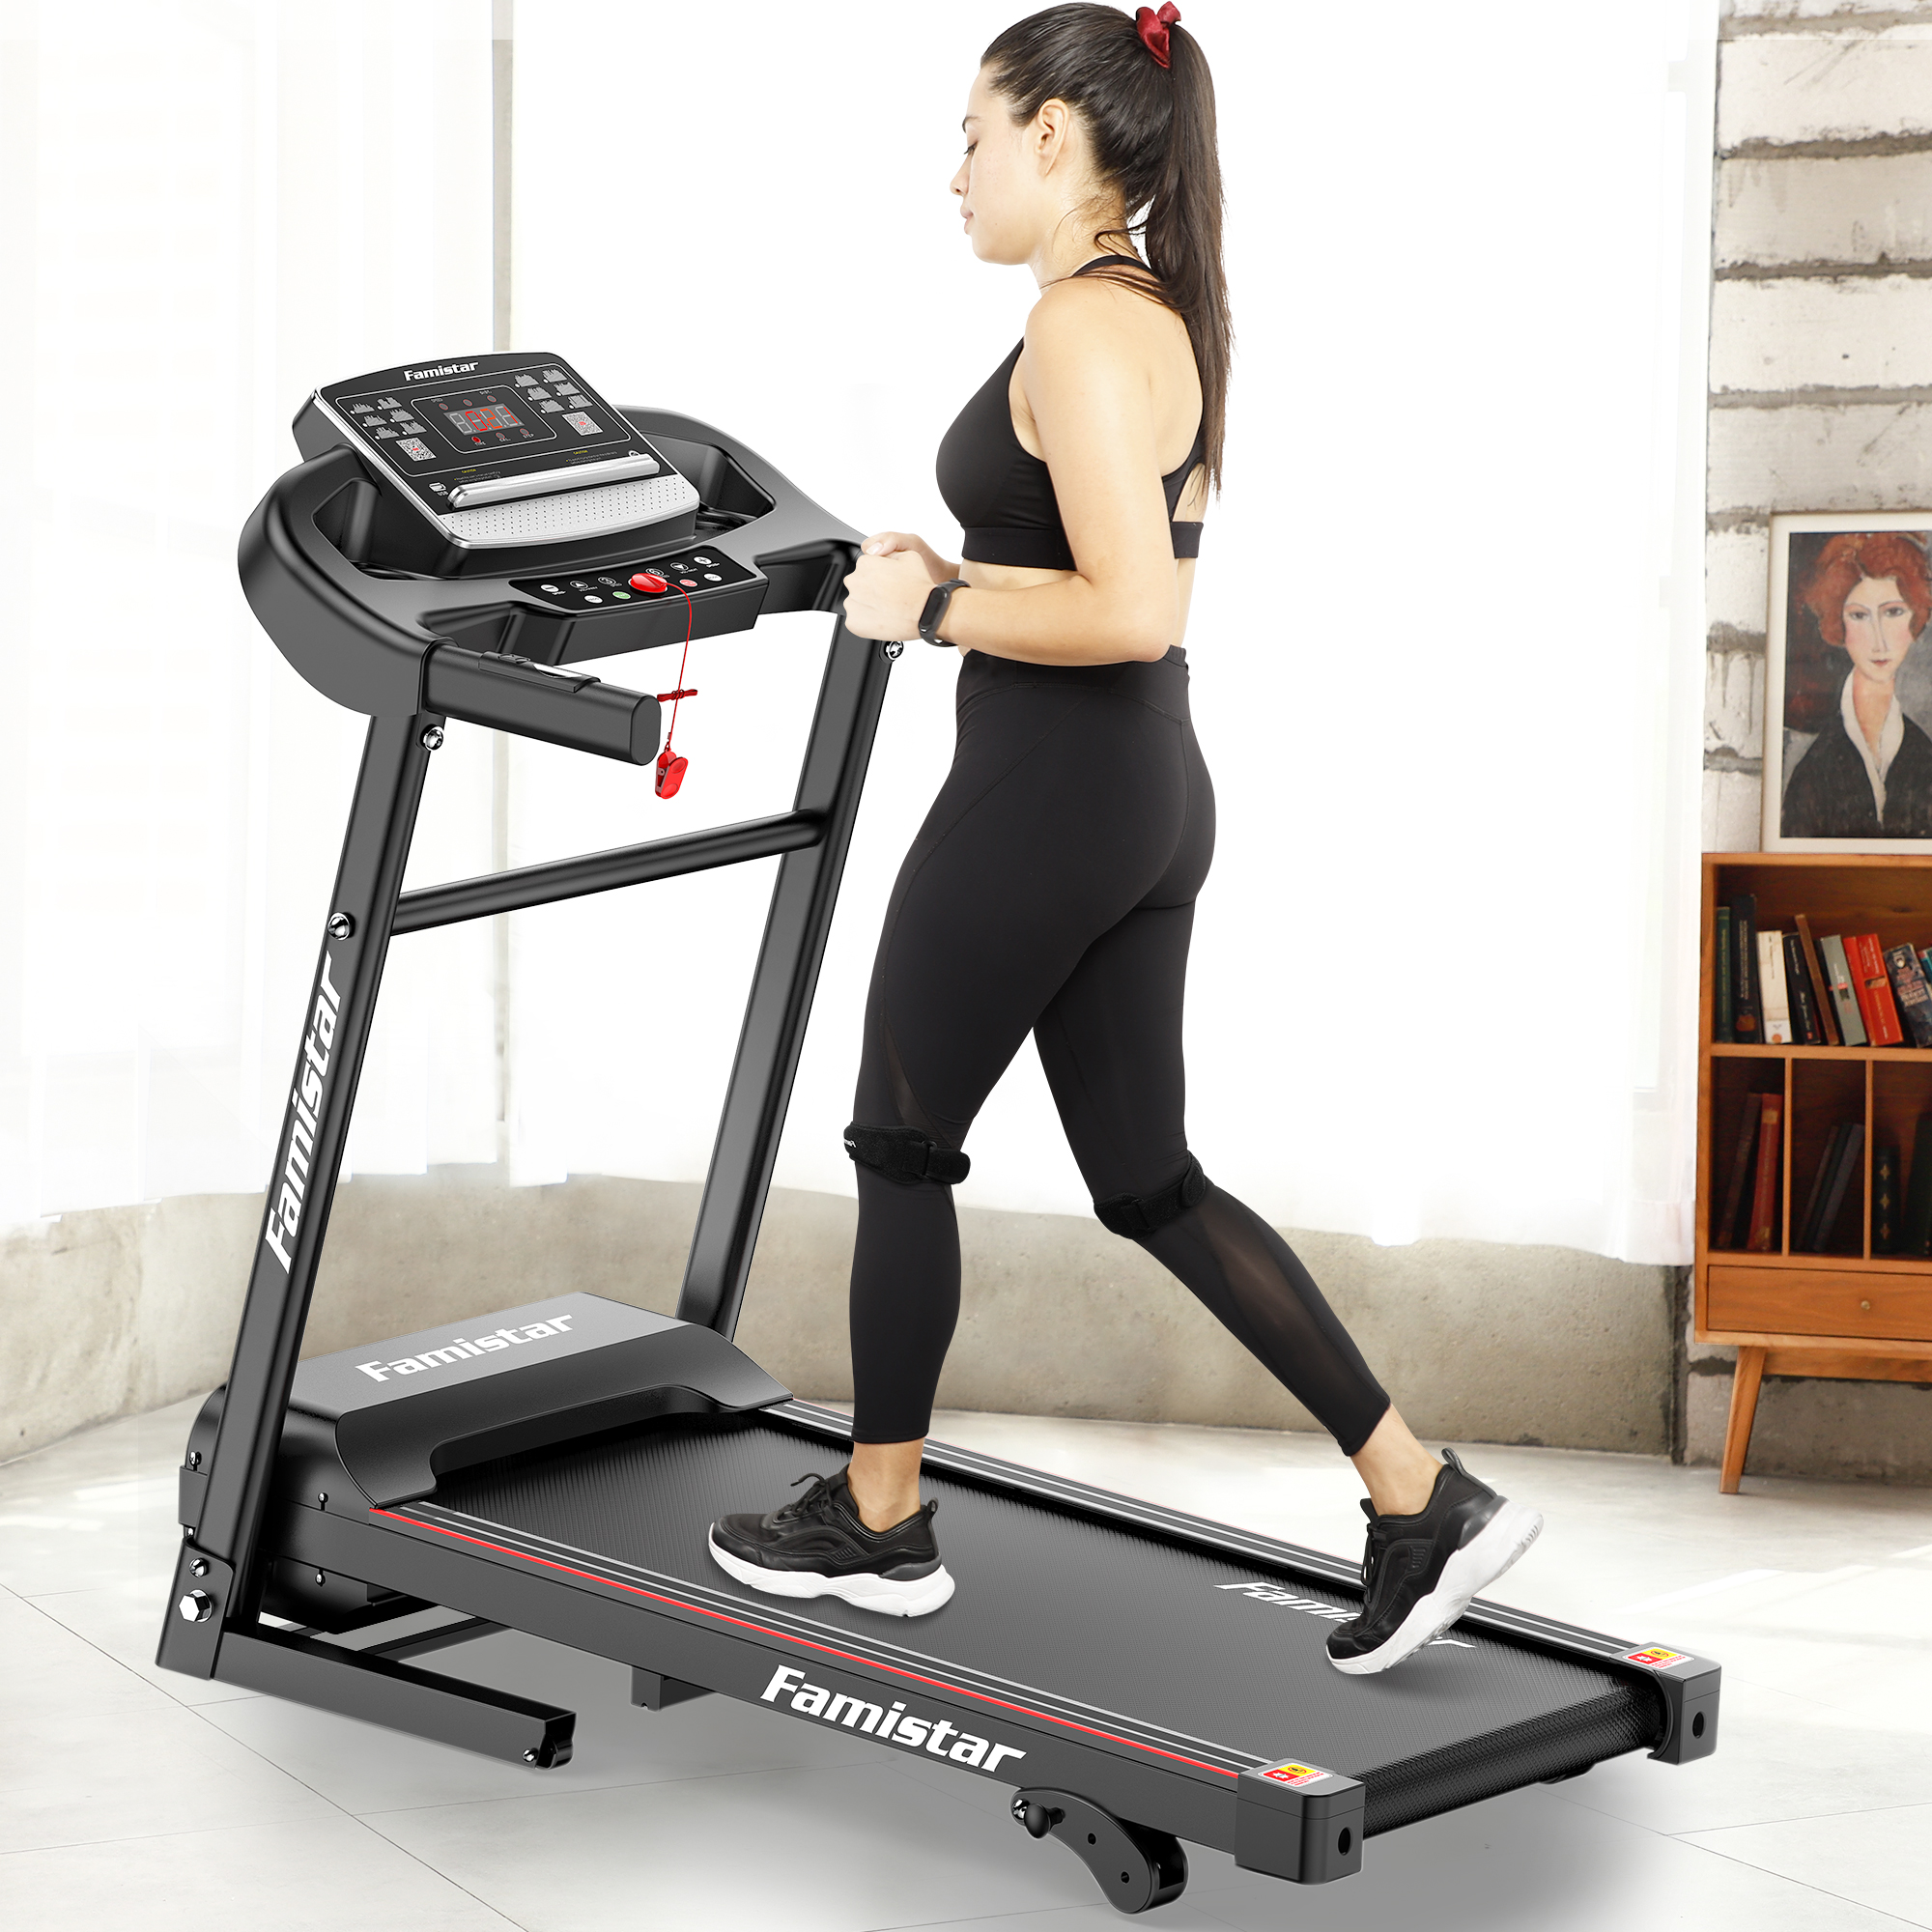 Famistar JK1607 Folding Electric Treadmill for Home Jogging Running with 2.5HP 3 Manual Incline | MP3 Player | Safety Key | LCD Display | Cup Holder - Portable Space Saving - Free Gift 2 Knee Straps - image 2 of 11